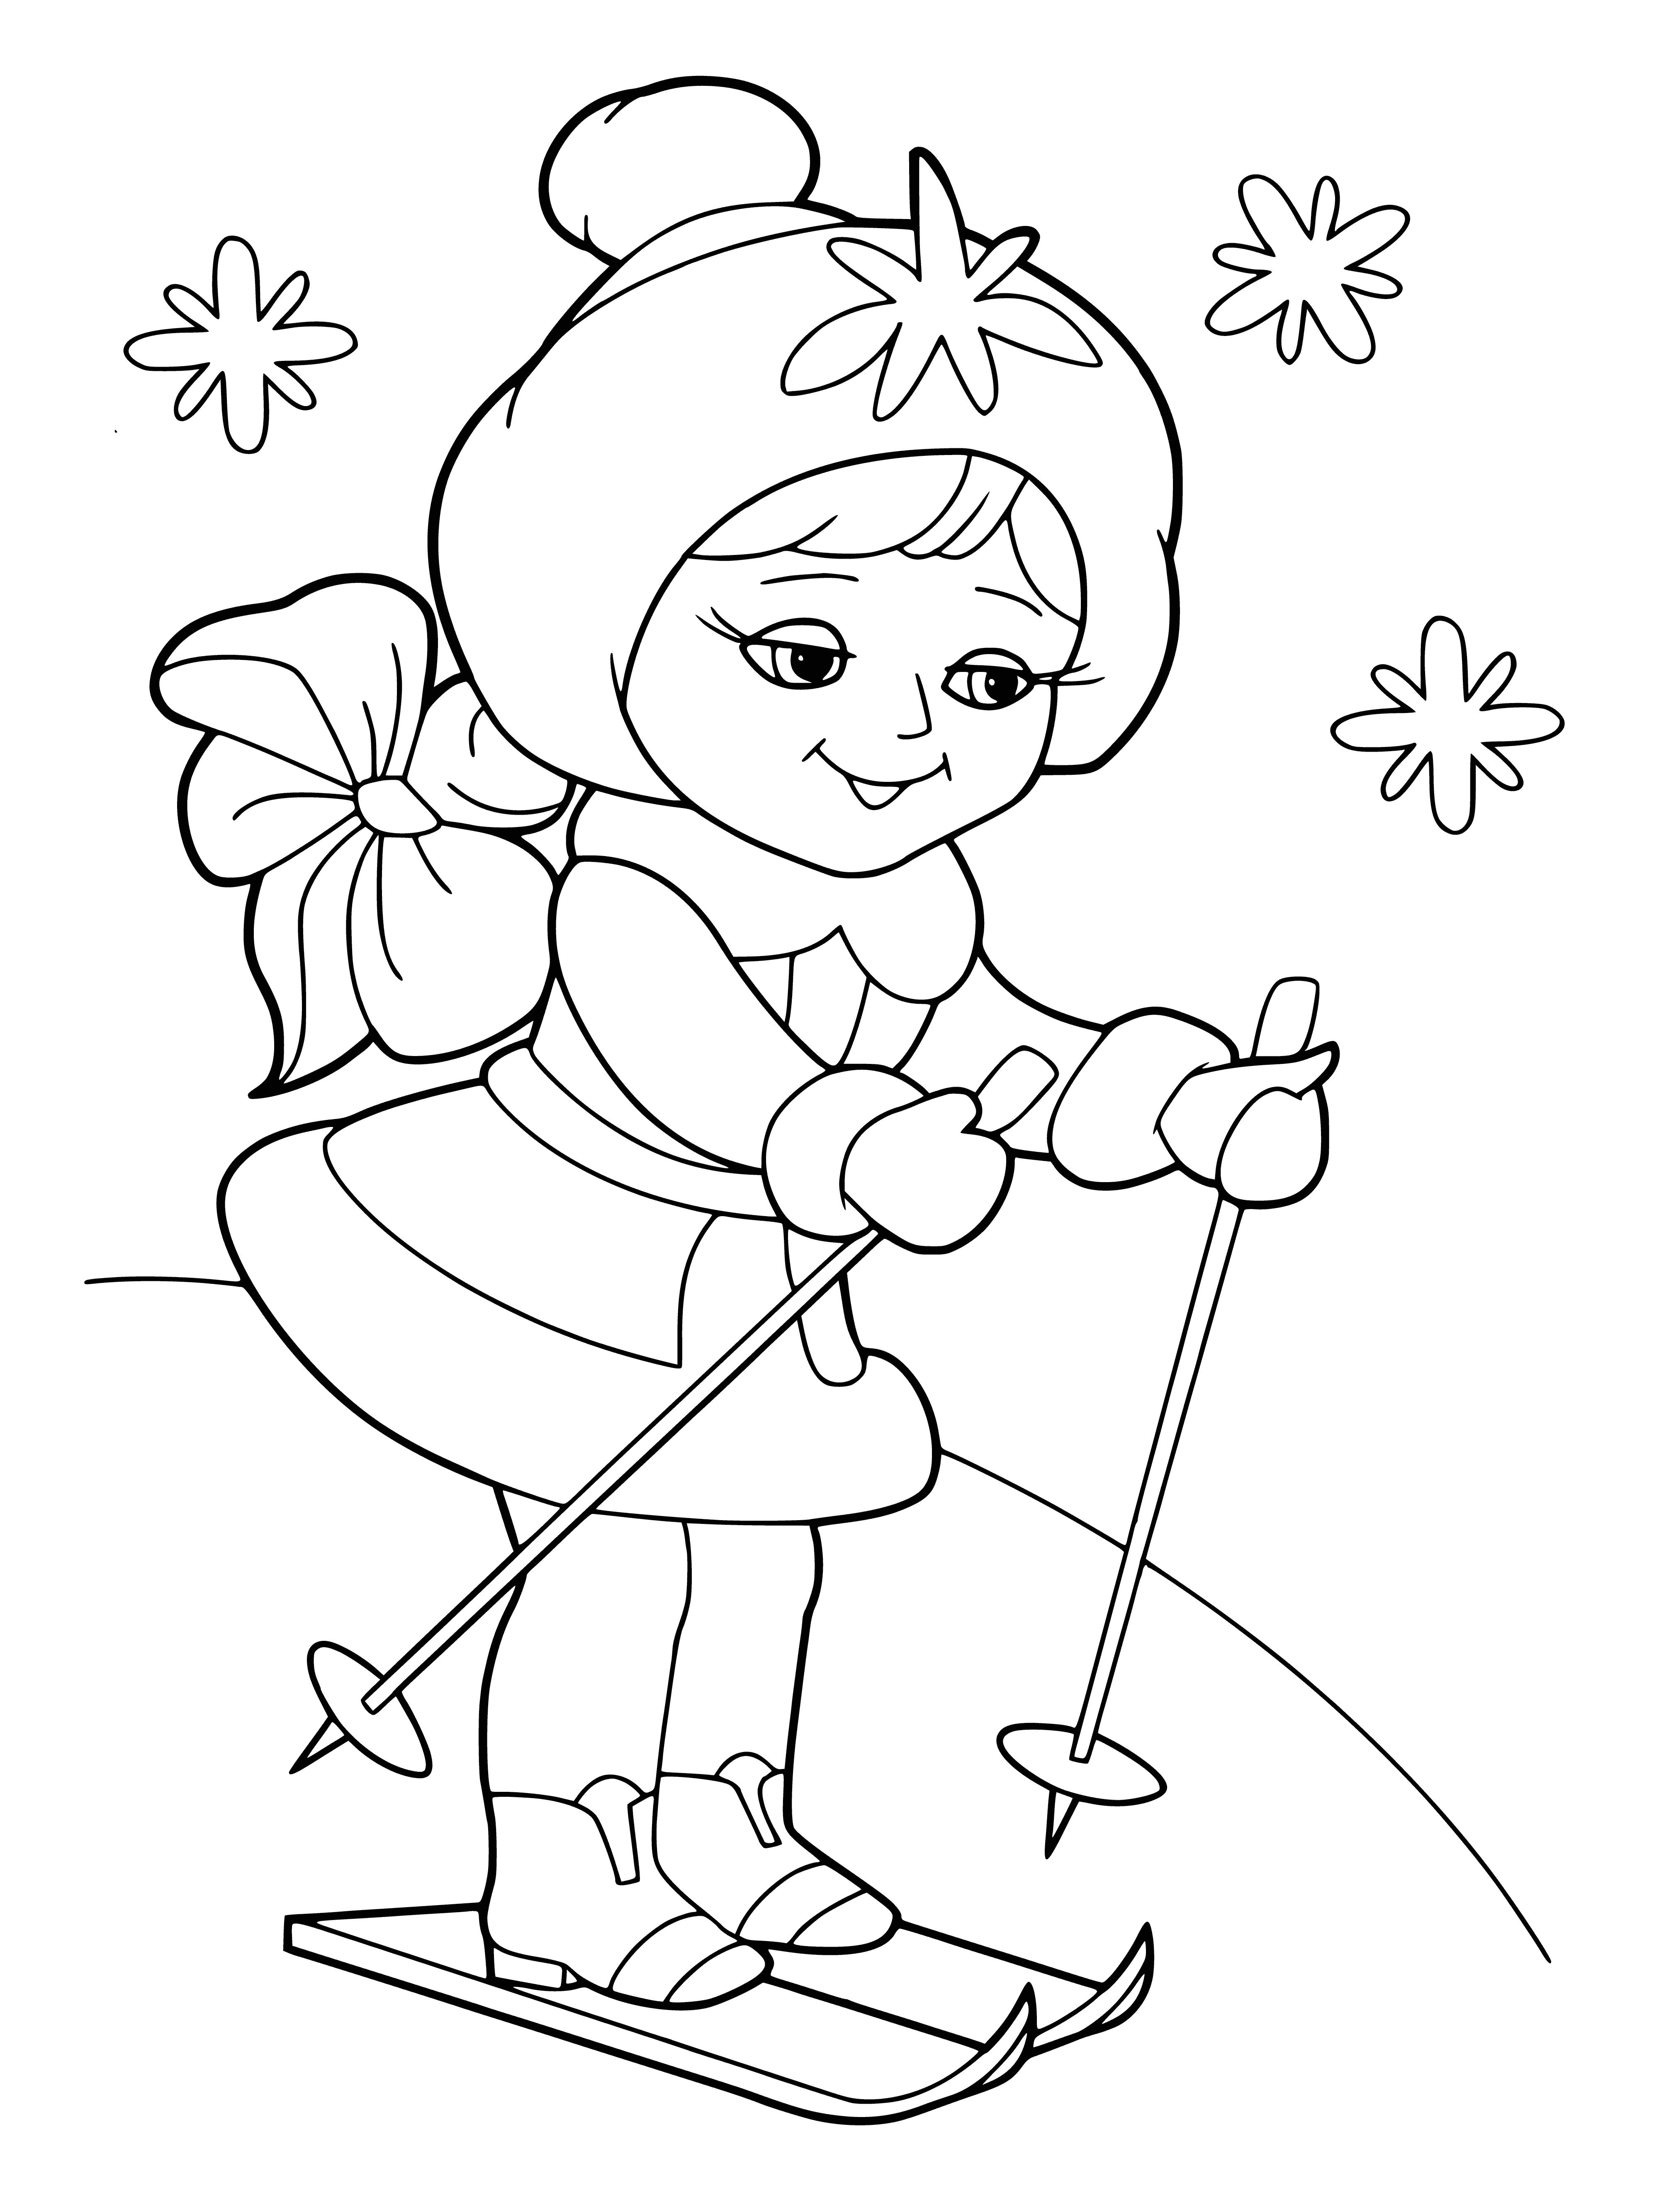 coloring page: Girl in winter gear stands on skis holding poles with blue scarf, jacket, headband & snowflake-decorated white dress.